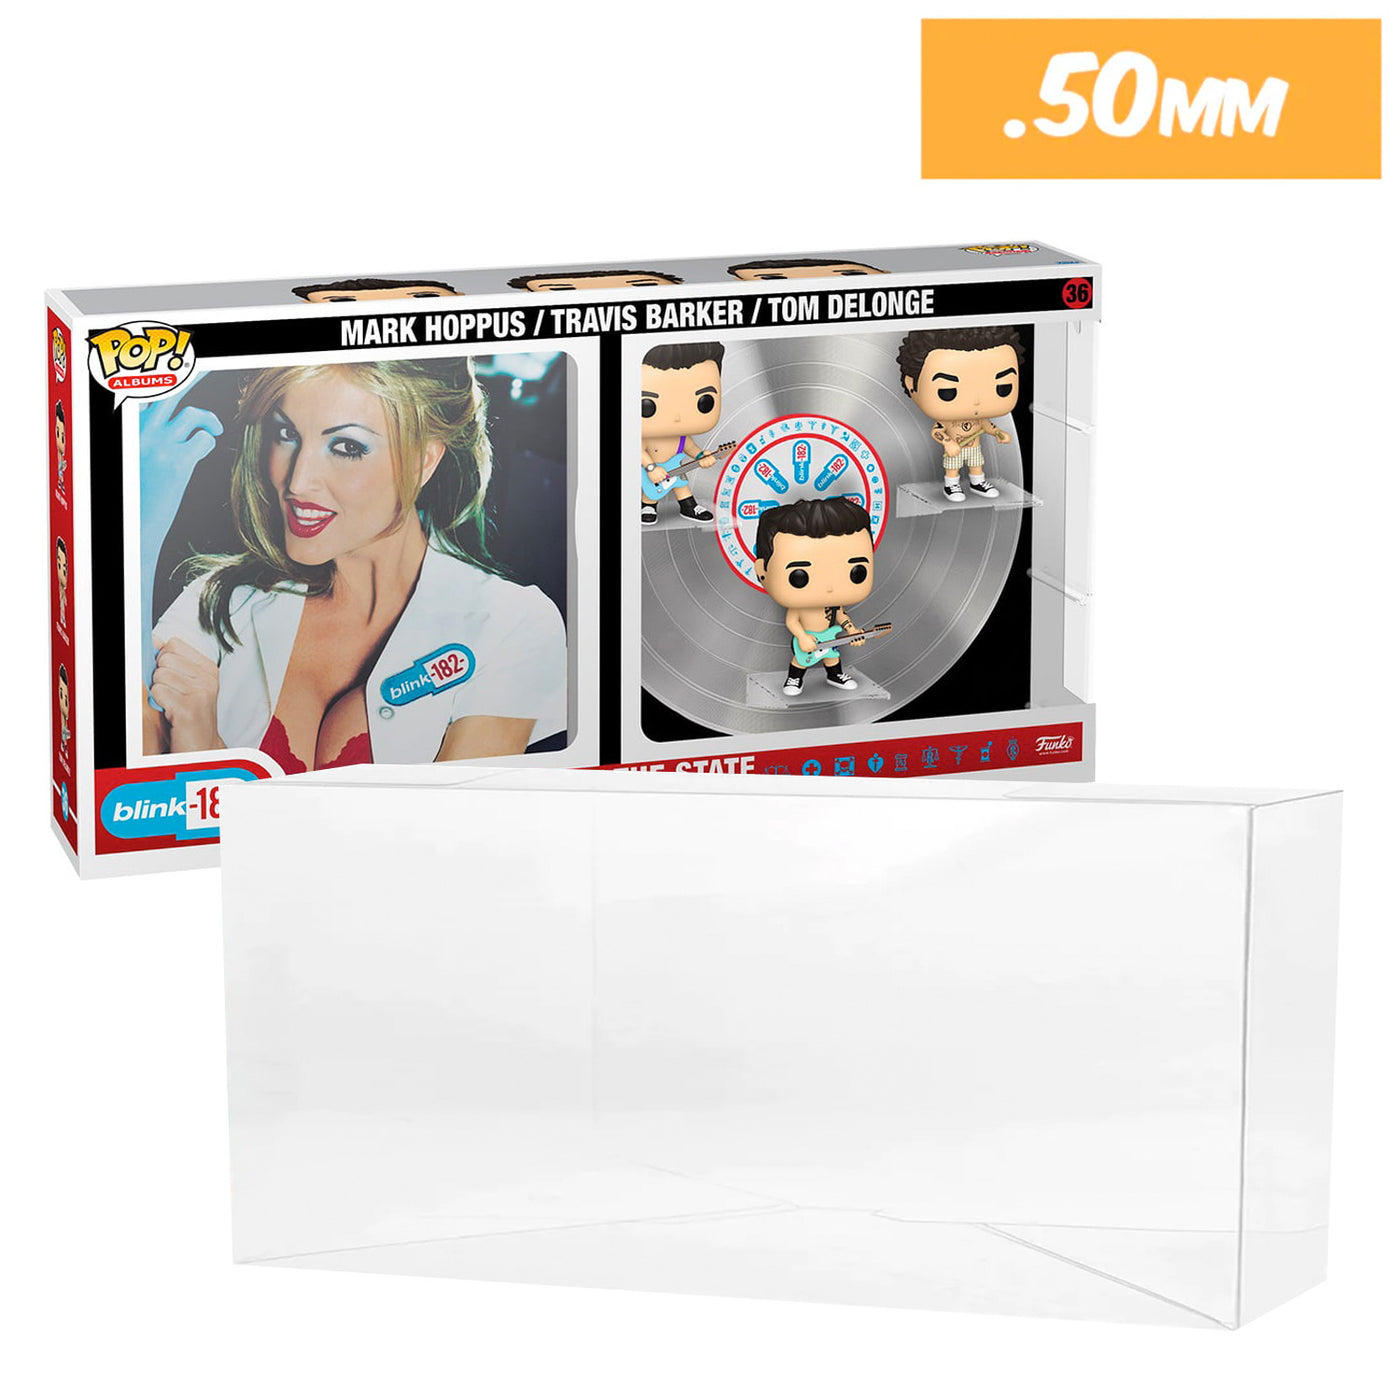 36 blink 182 enema of the state pop albums deluxe best funko pop protectors thick strong uv scratch flat top stack vinyl display geek plastic shield vaulted eco armor fits collect protect display case kollector protector